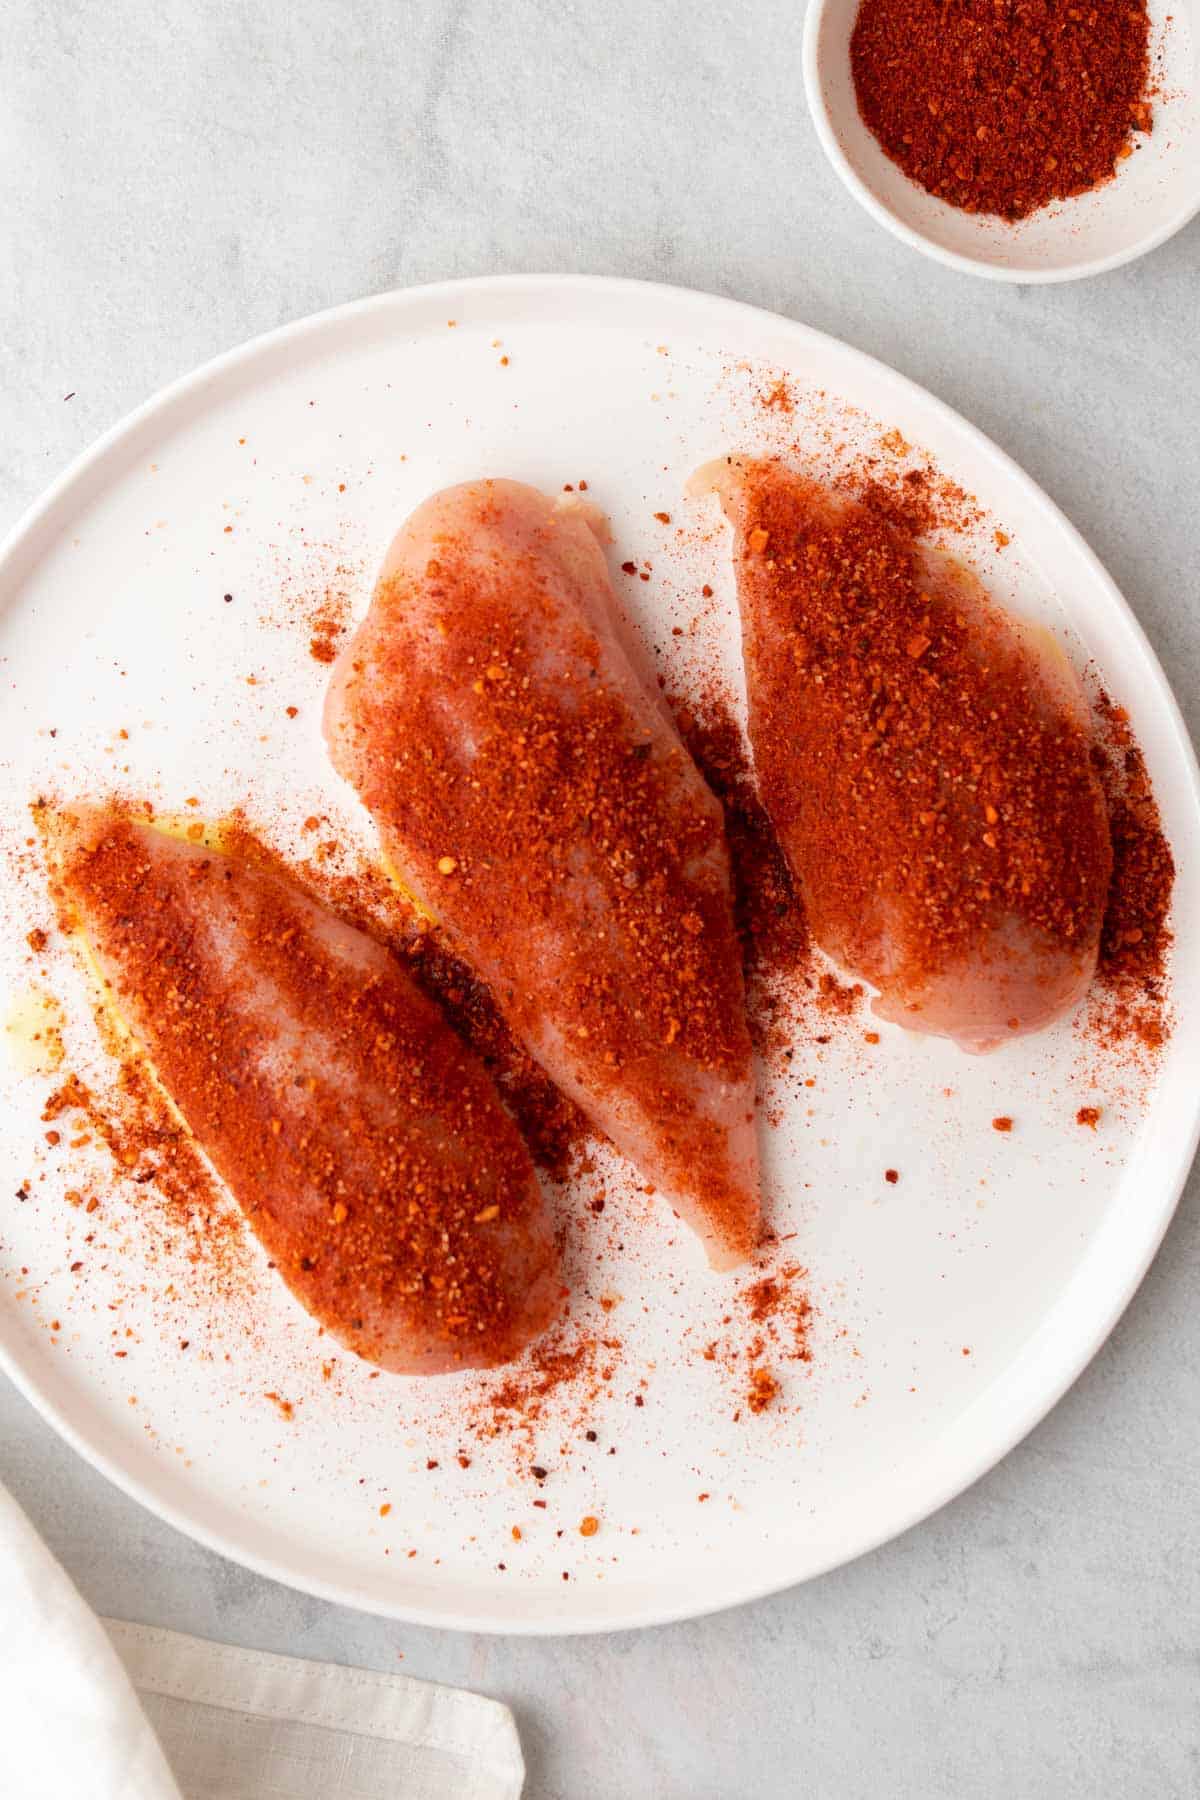 Three raw chicken breasts on a white plate seasoned with taco seasoning, as seen from above